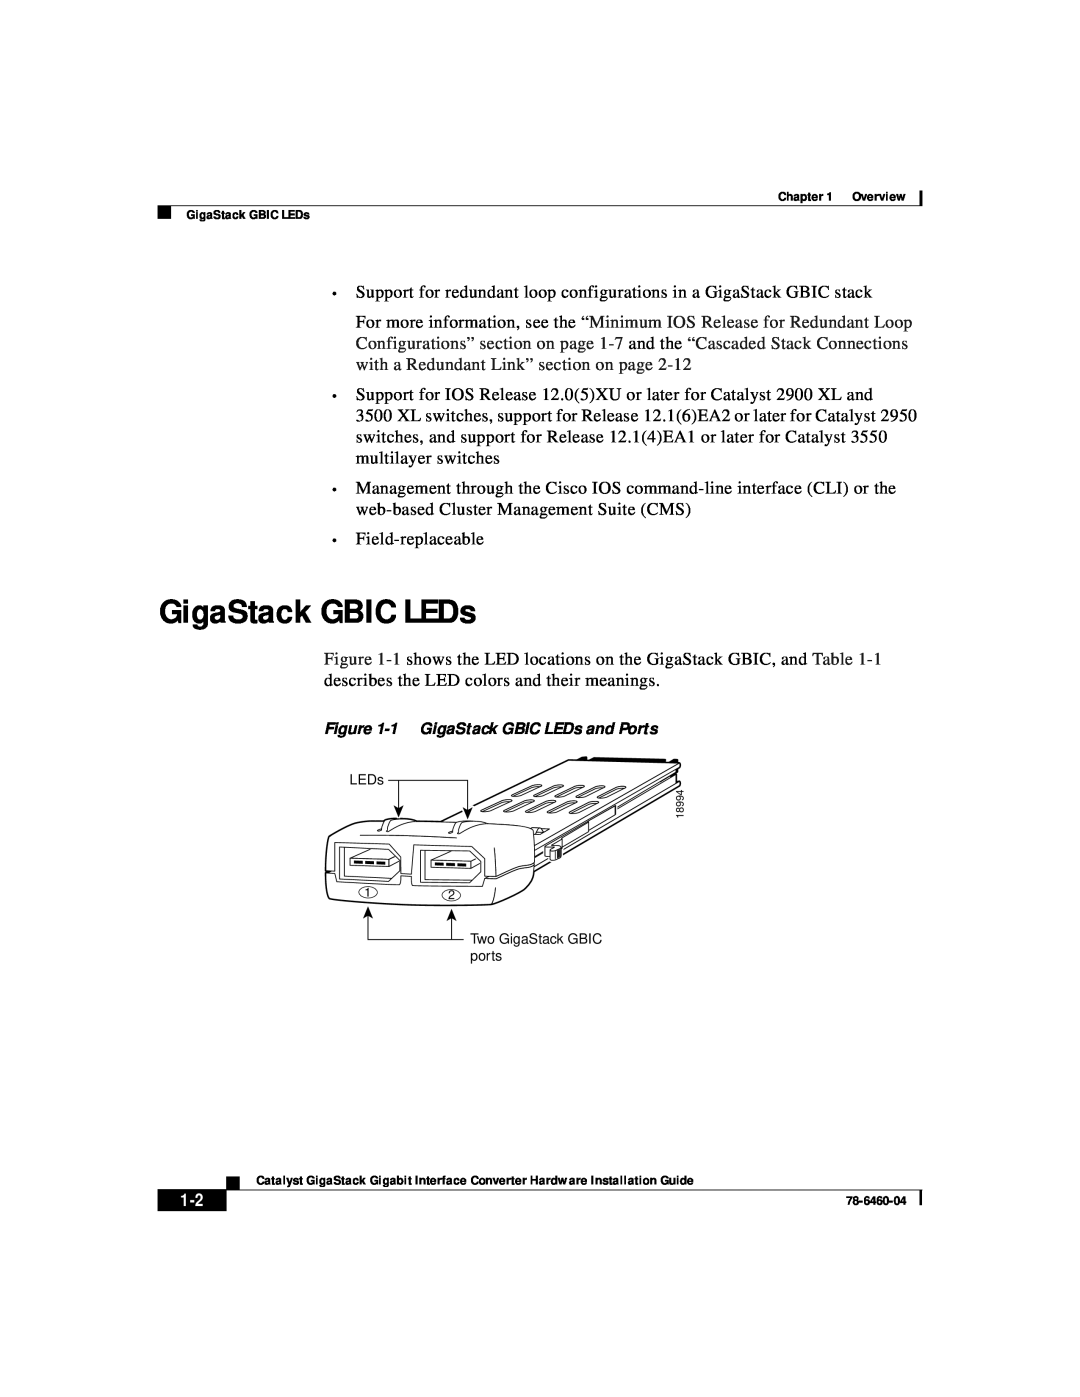 Cisco Systems WS-X3500-XL manual GigaStack GBIC LEDs 